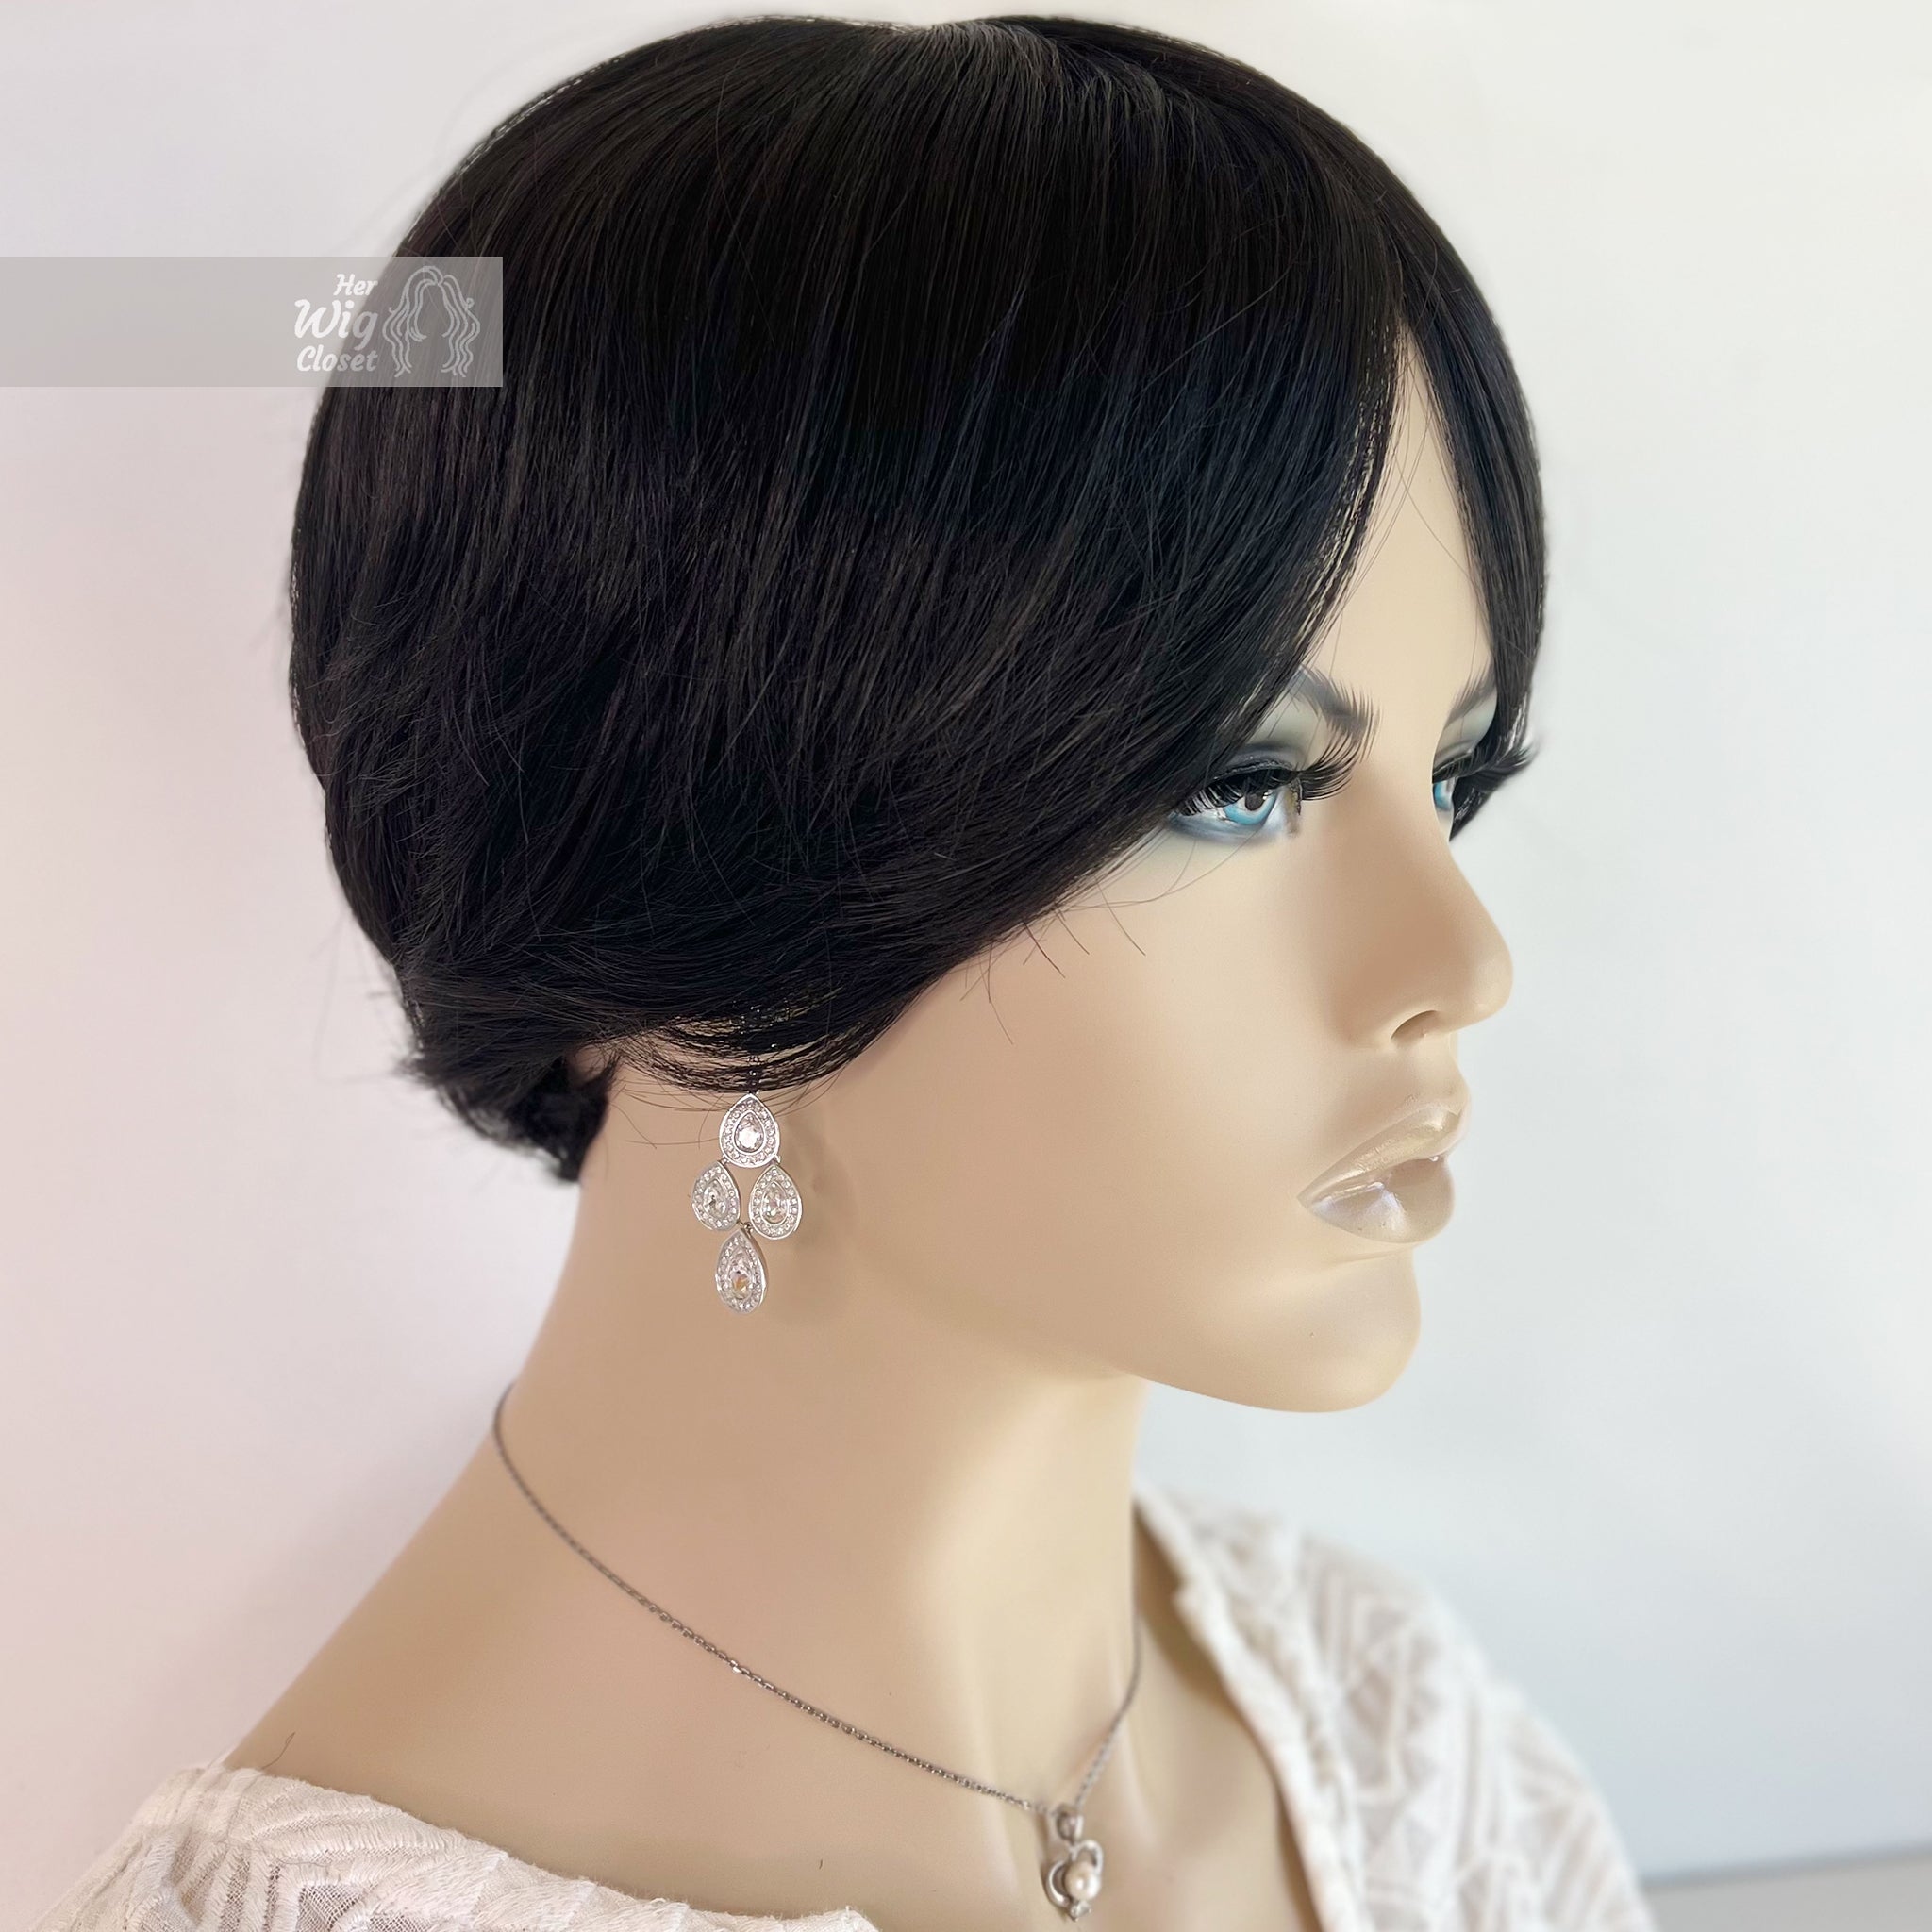 Buy Haned Short Bob Gray Ombre Wigs Synthetic Hair For Black Women Applies:  Stylish Girl Of Silk Material: High Temperature Wire Wig Category: Liu, Liu Wig  Hairstyle: Short Straight Hair Style: The